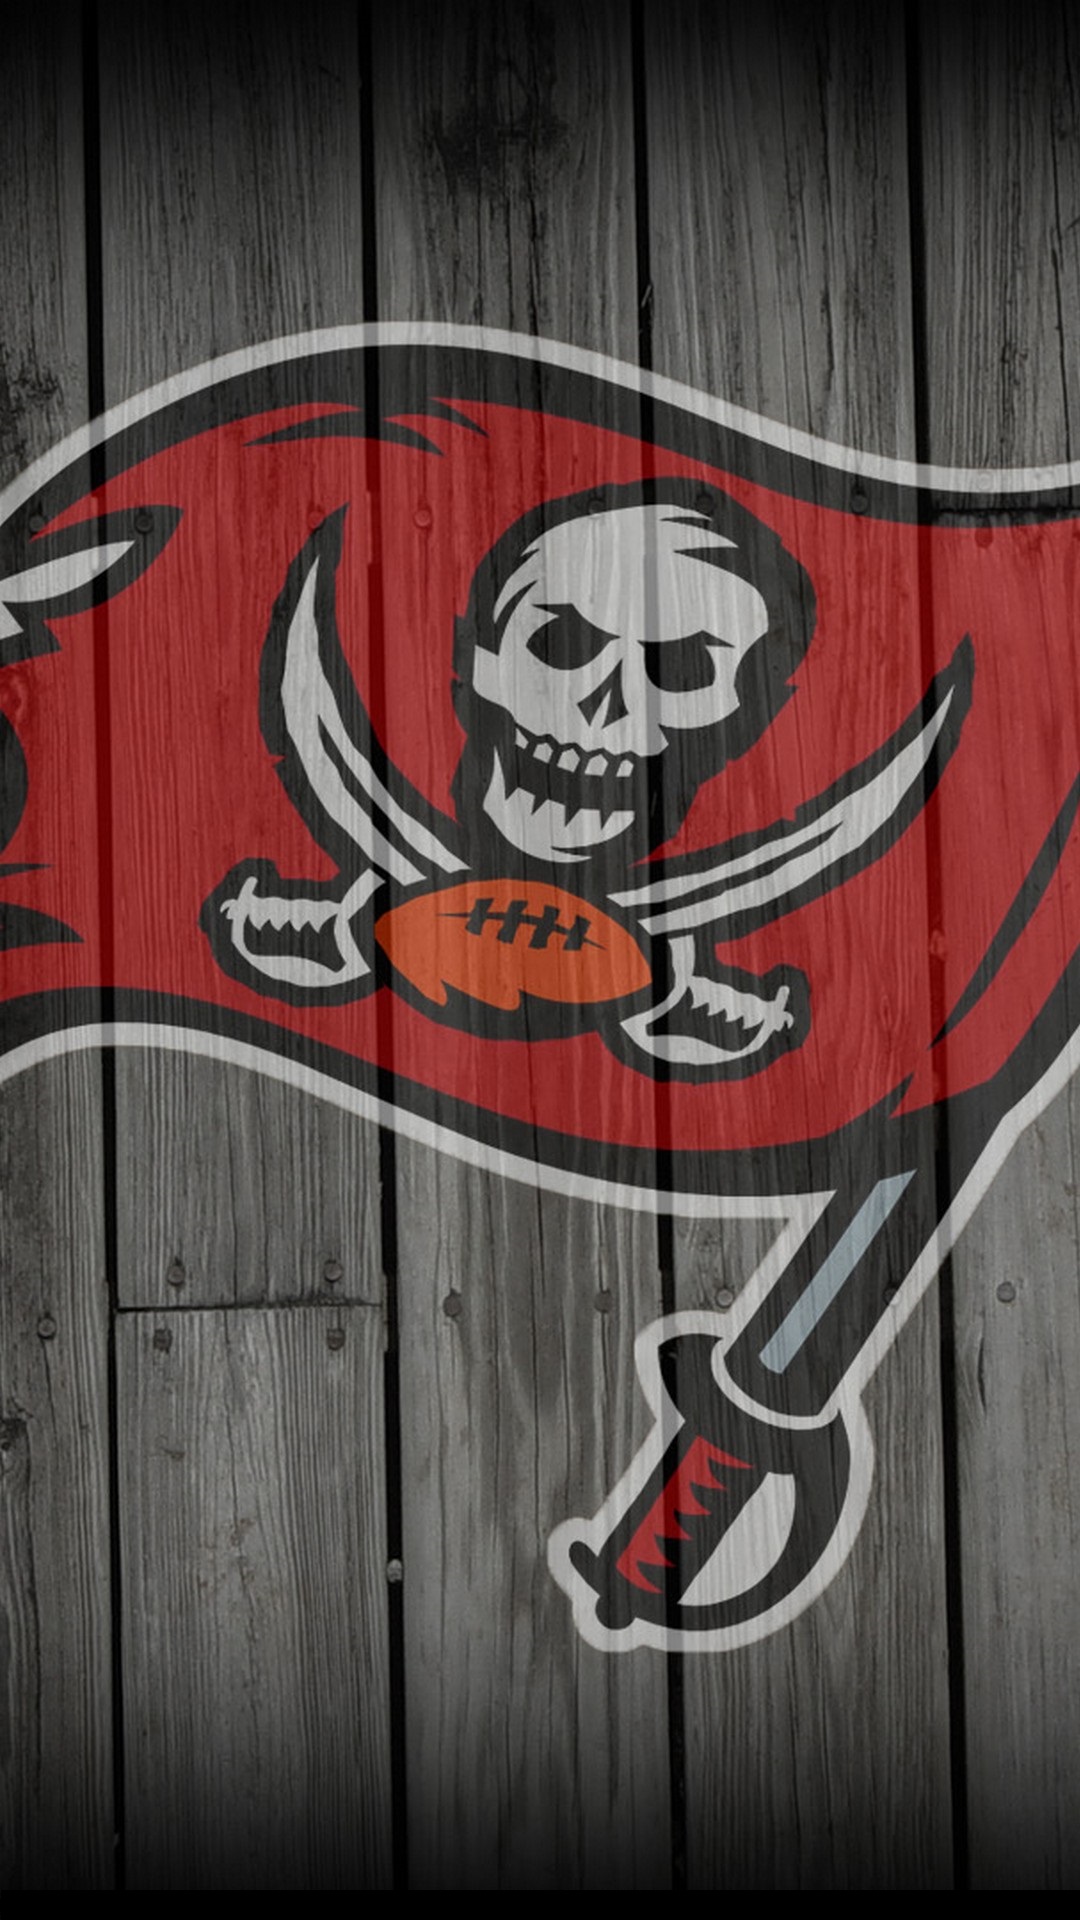 Tampa Bay Buccaneers HD Wallpaper For iPhone With high-resolution 1080X1920 pixel. You can use this wallpaper for your Mac or Windows Desktop Background, iPhone, Android or Tablet and another Smartphone device